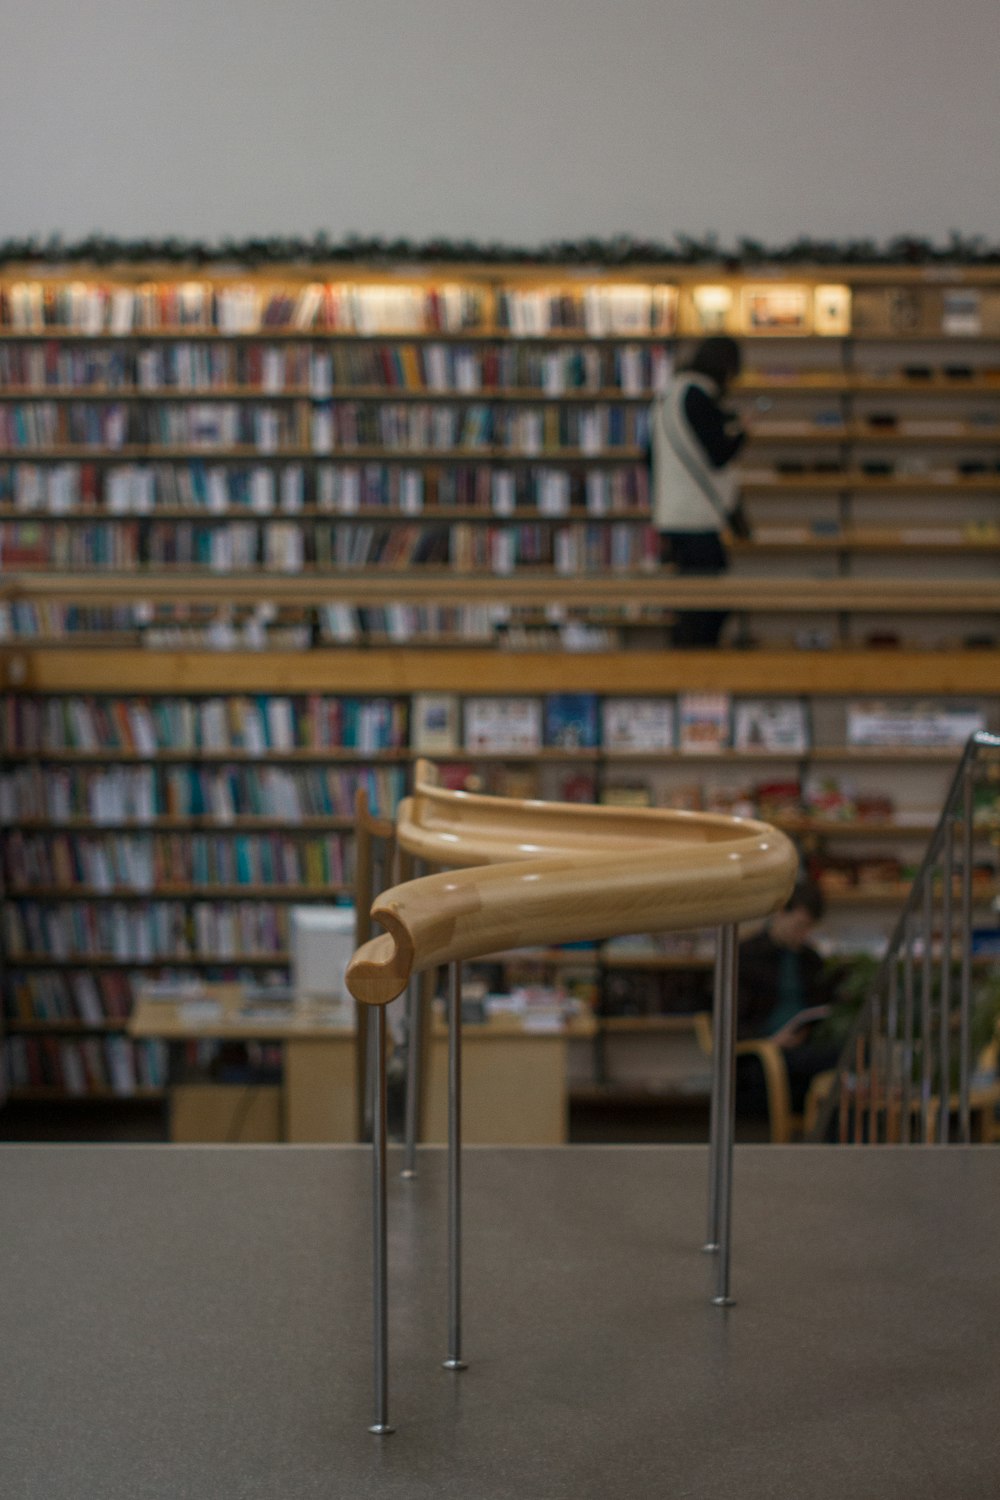 a wooden chair sitting in front of a bookshelf